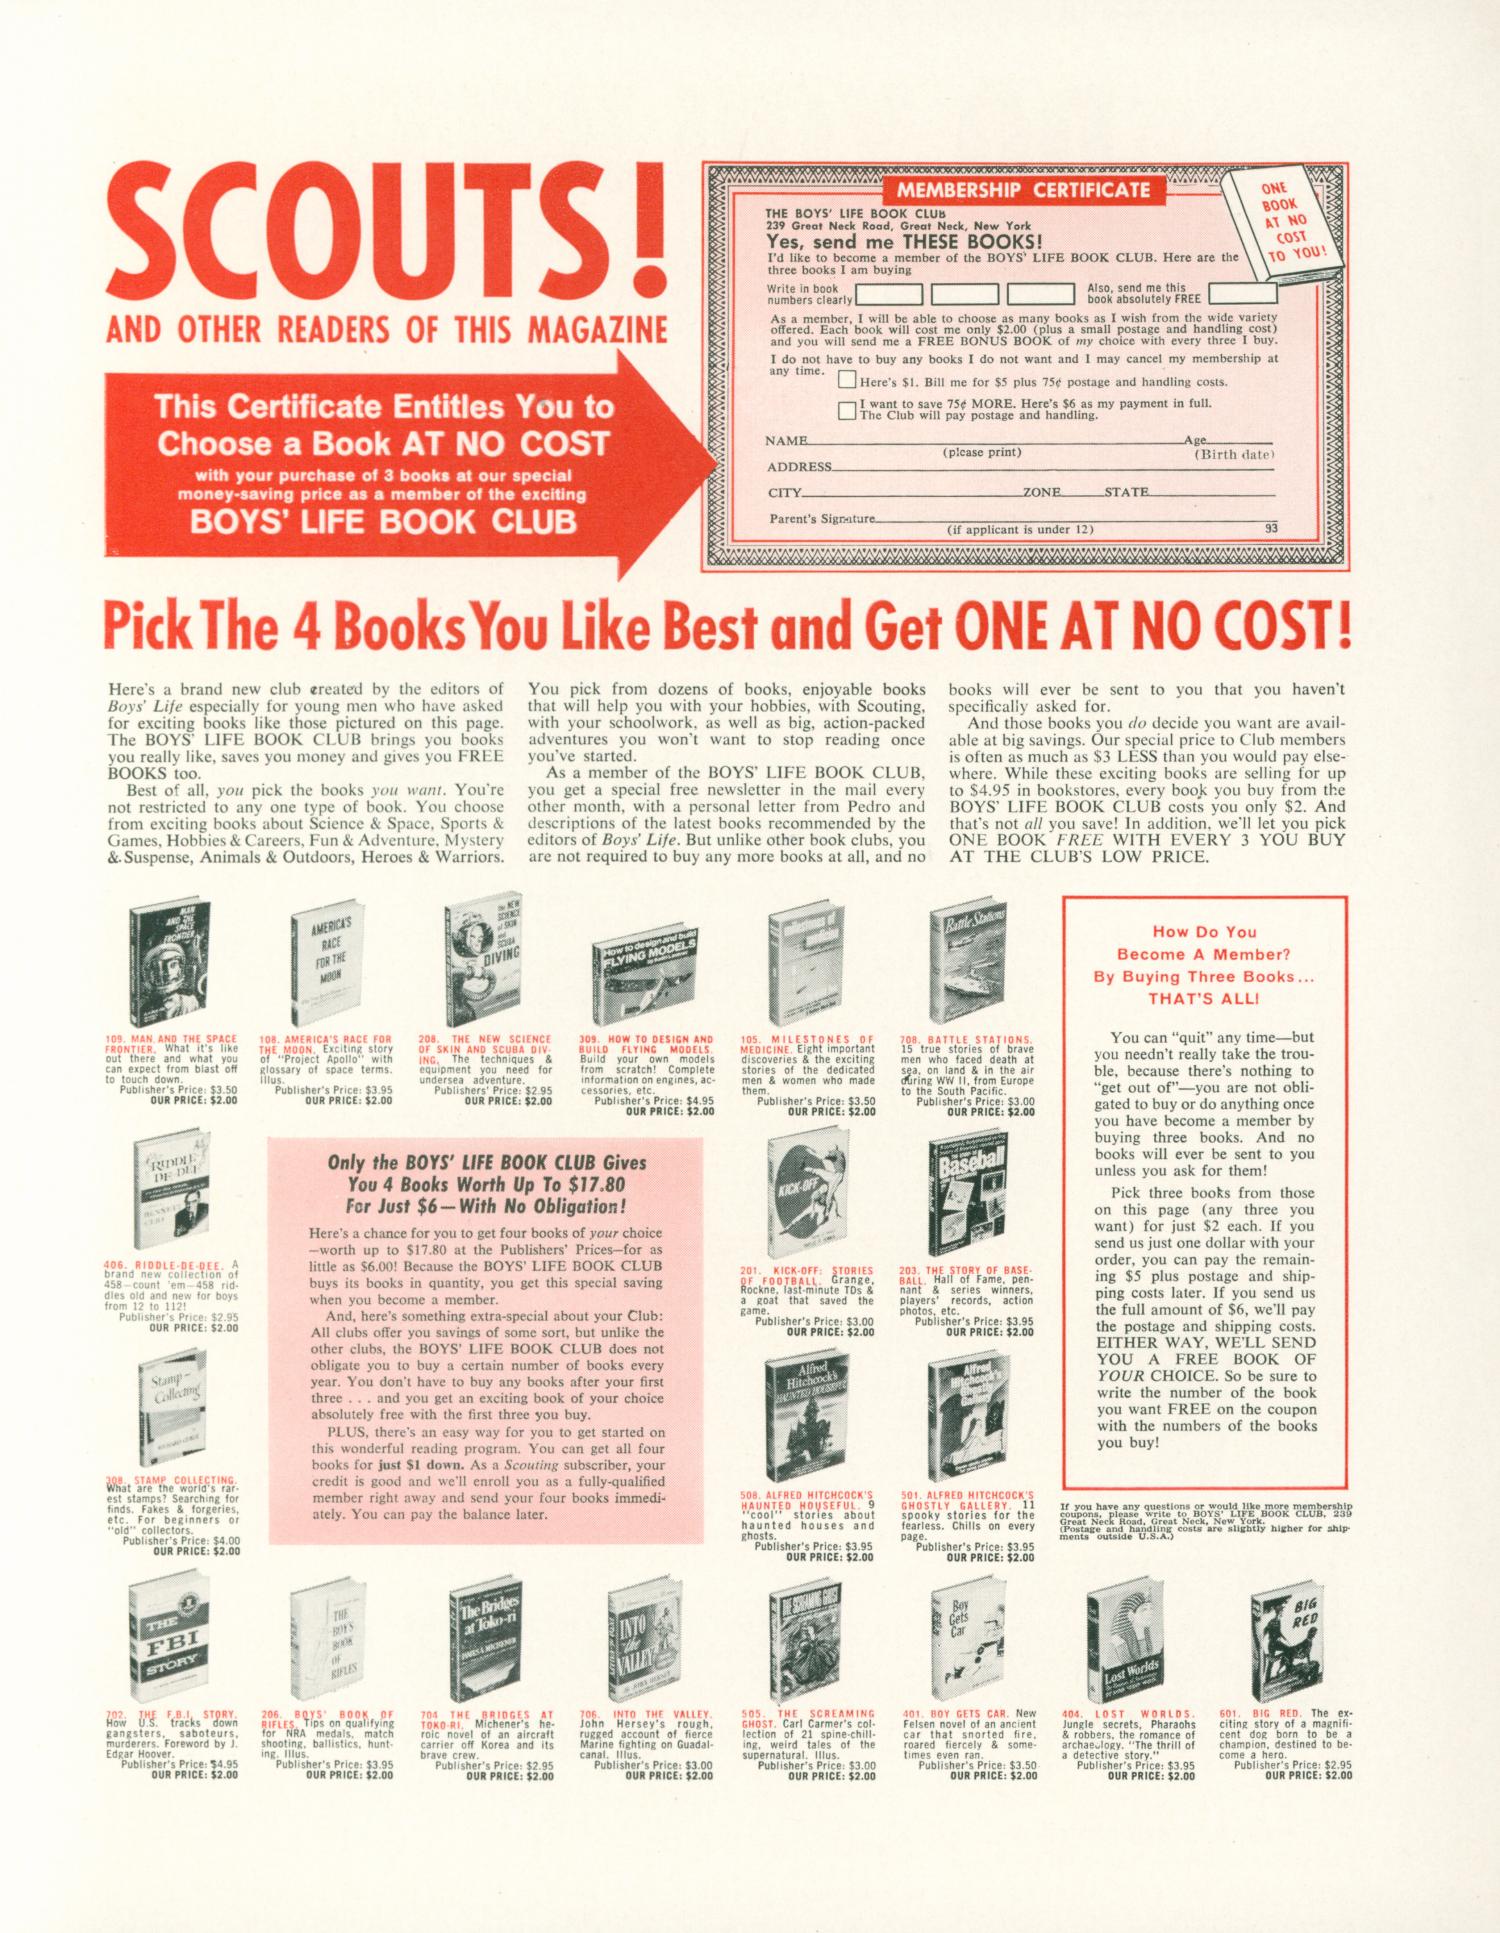 Scouting, Volume 51, Number 3, March 1963
                                                
                                                    Back Inside
                                                